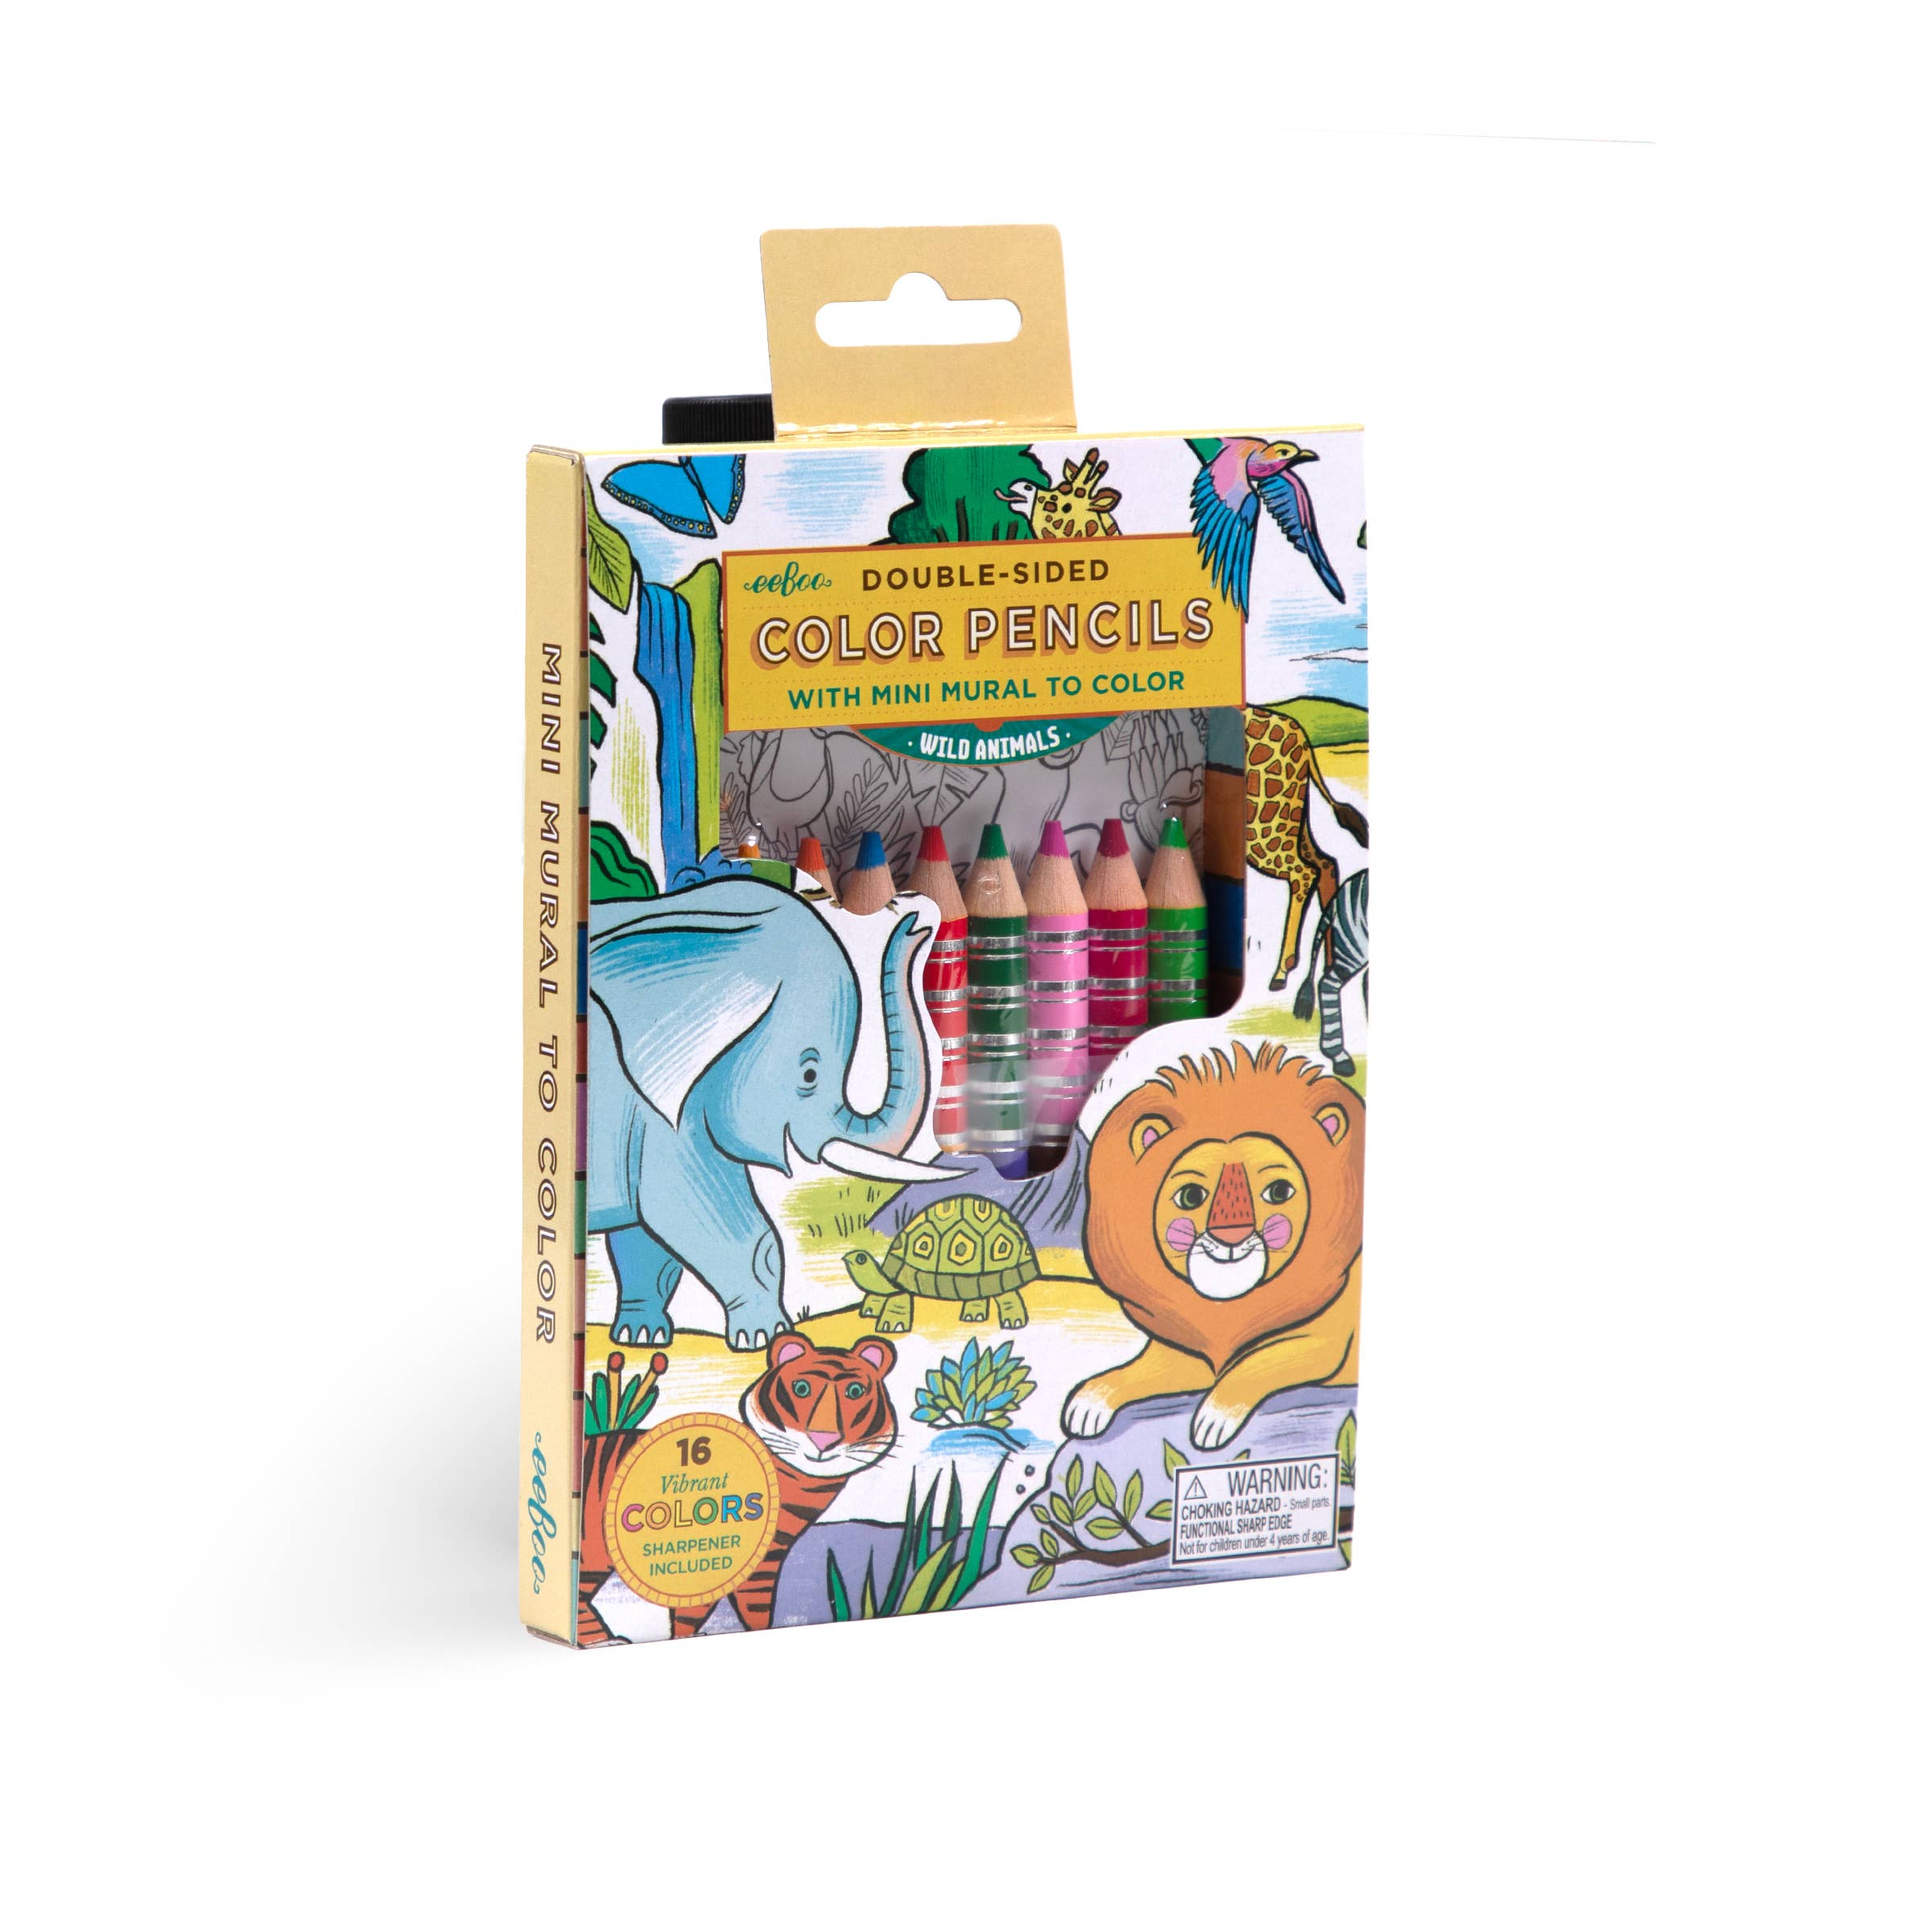 Wild Animals Biggie Pencils with Fold-Out Mini Mural Bundle